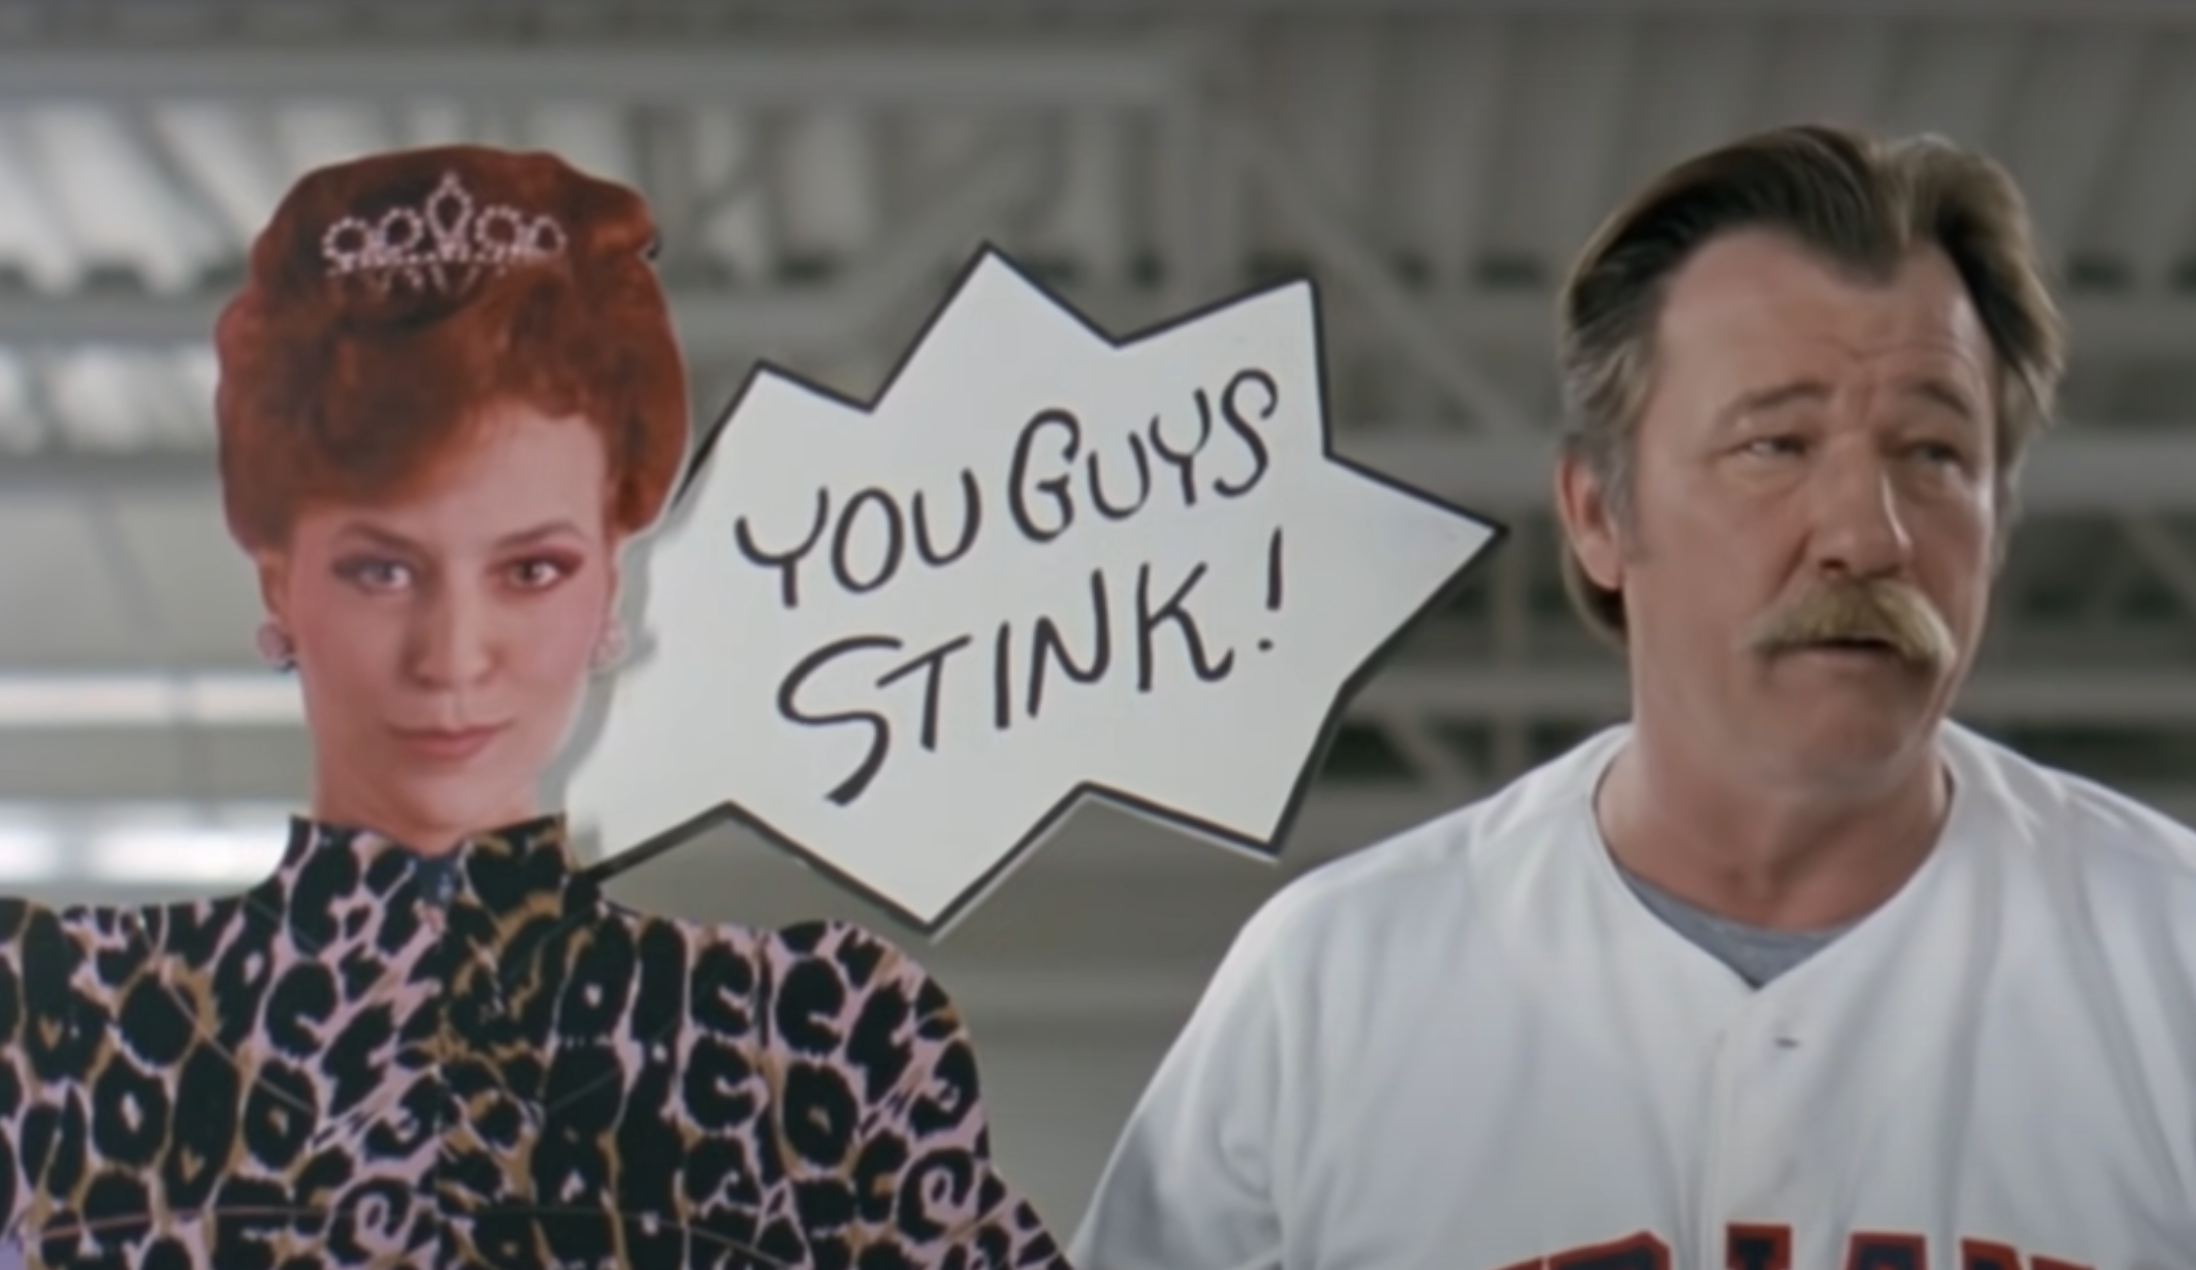 A cardboard cutout of a woman with a comic bubble saying &quot;You guys stink!&quot; next to a man with a mustache in a baseball uniform